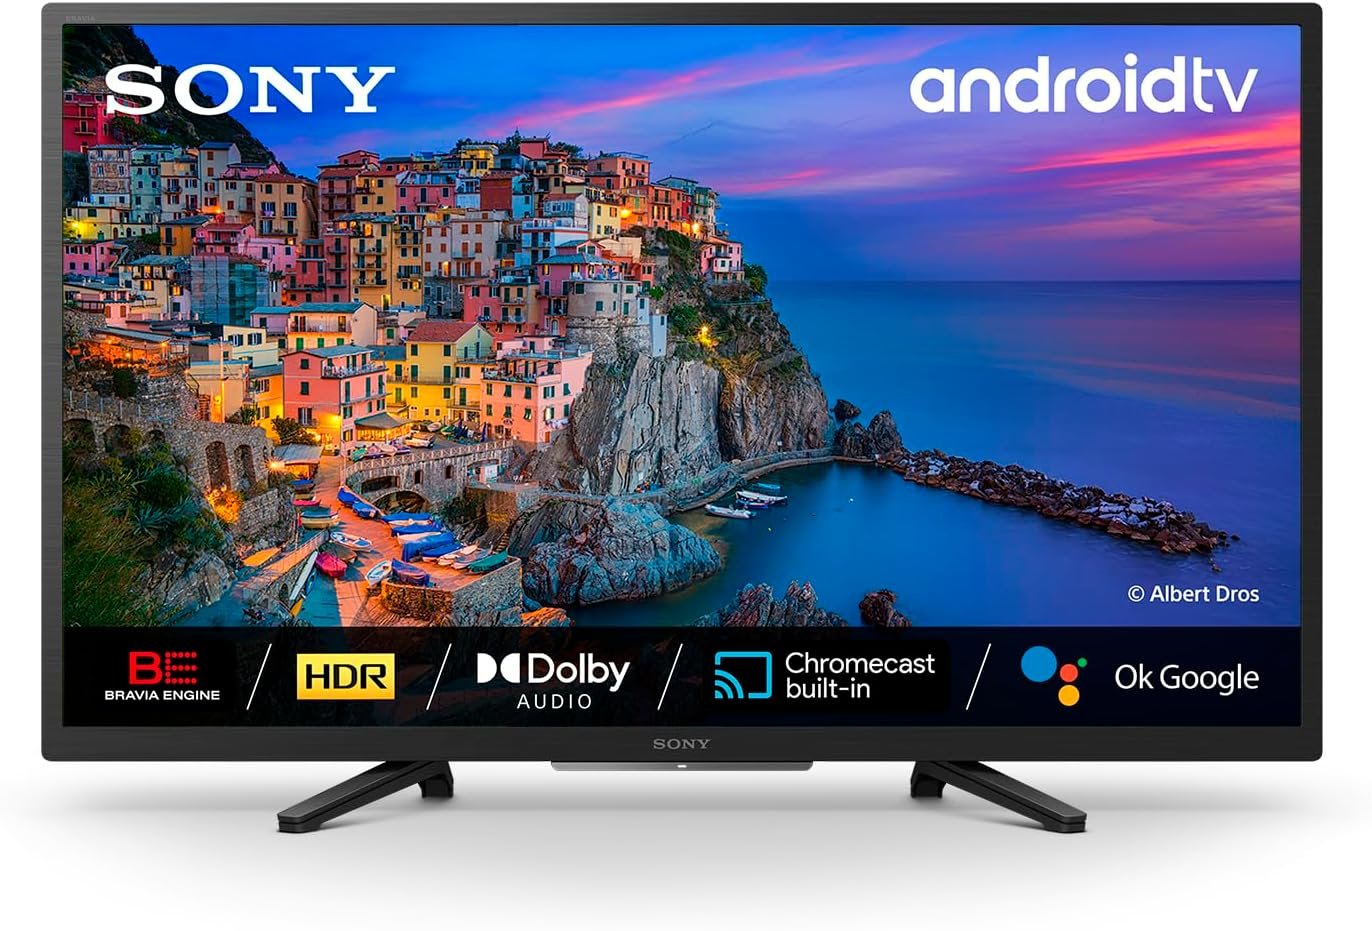 Sony BRAVIA KD-32W800 - Smart TV 32 pollici, HD Ready LED, HDR, Android TV, KD32W800PAEP